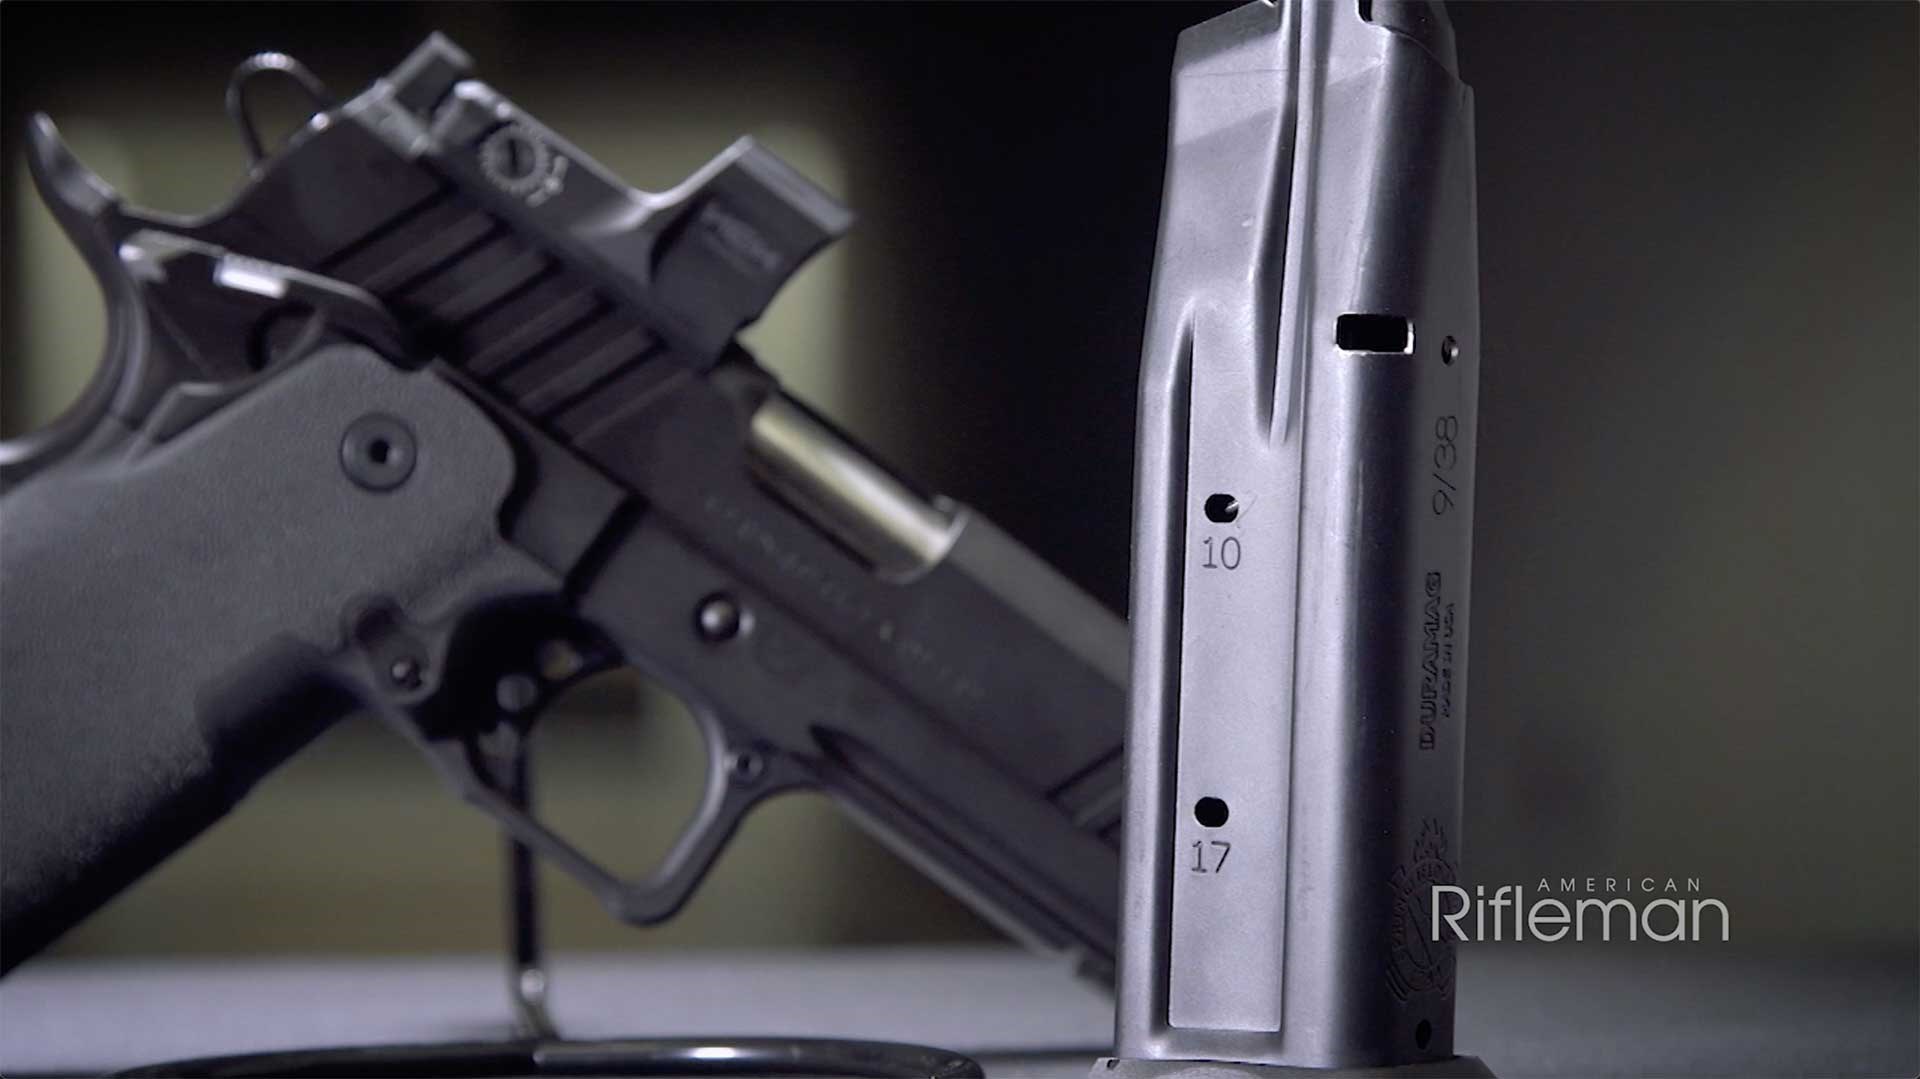 Double-stack, 17-round magazine standing up in front of the Springfield Armory Prodigy pistol.